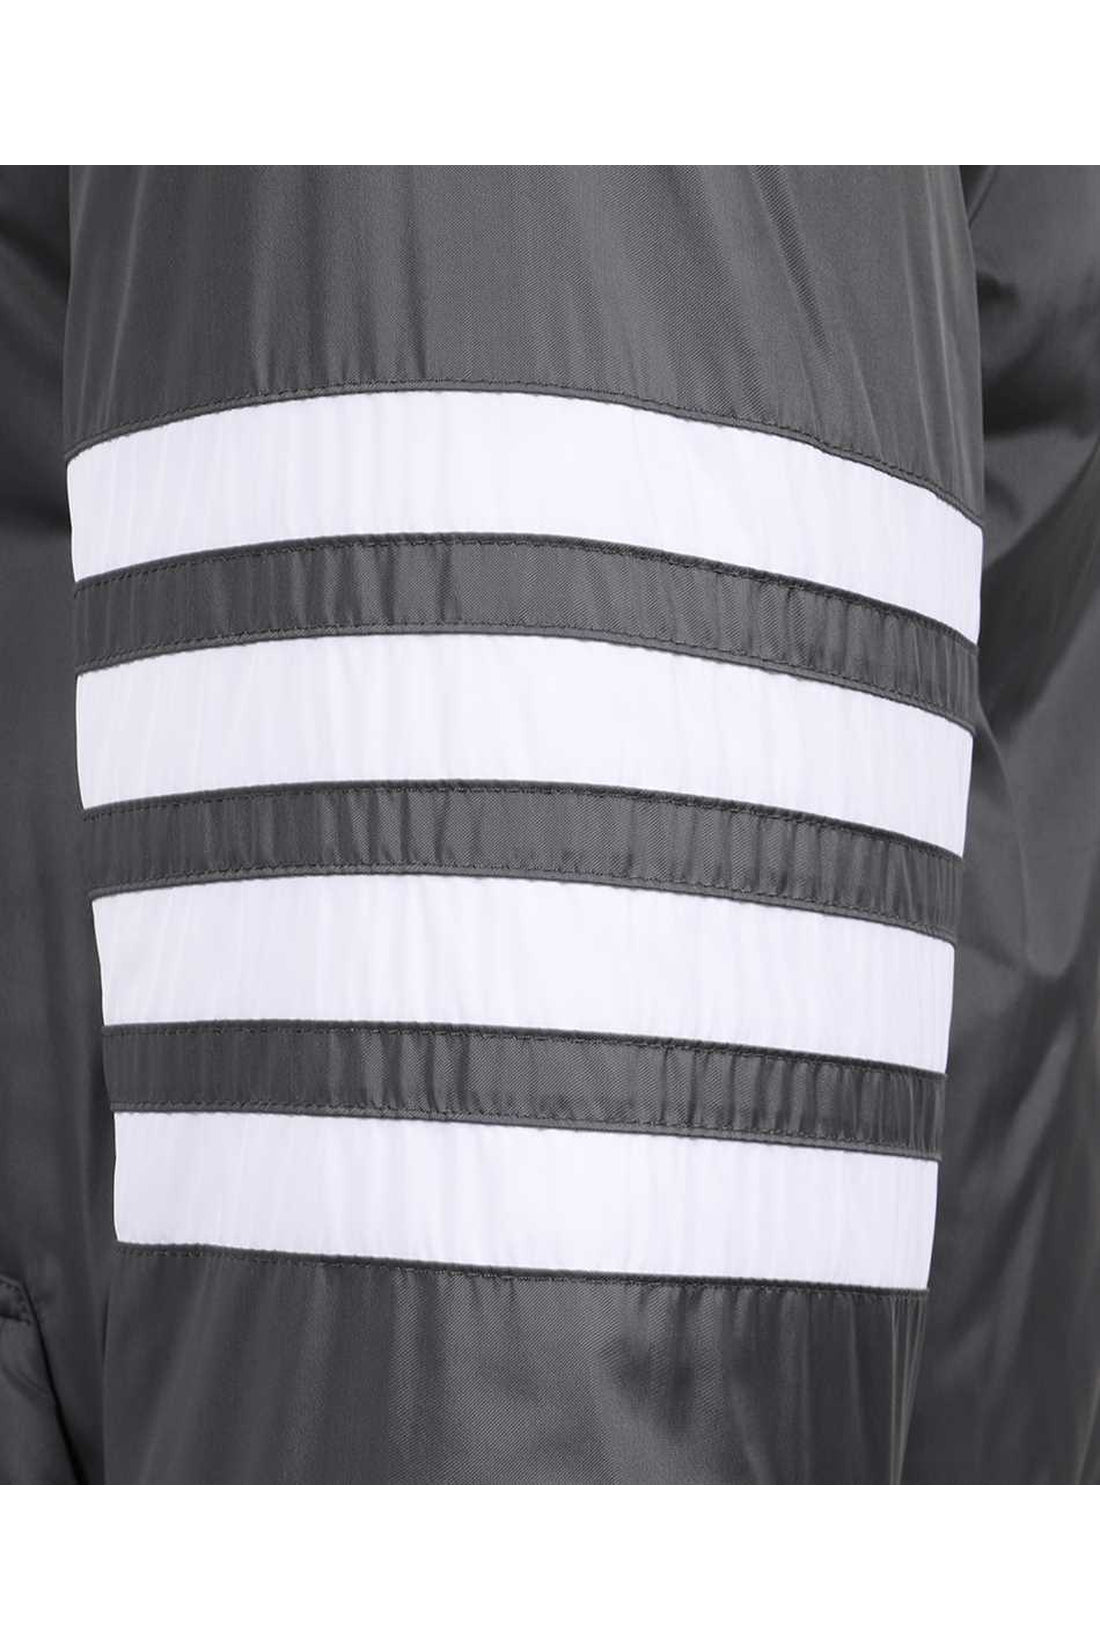 Thom Browne-OUTLET-SALE-Long quilted parka-ARCHIVIST